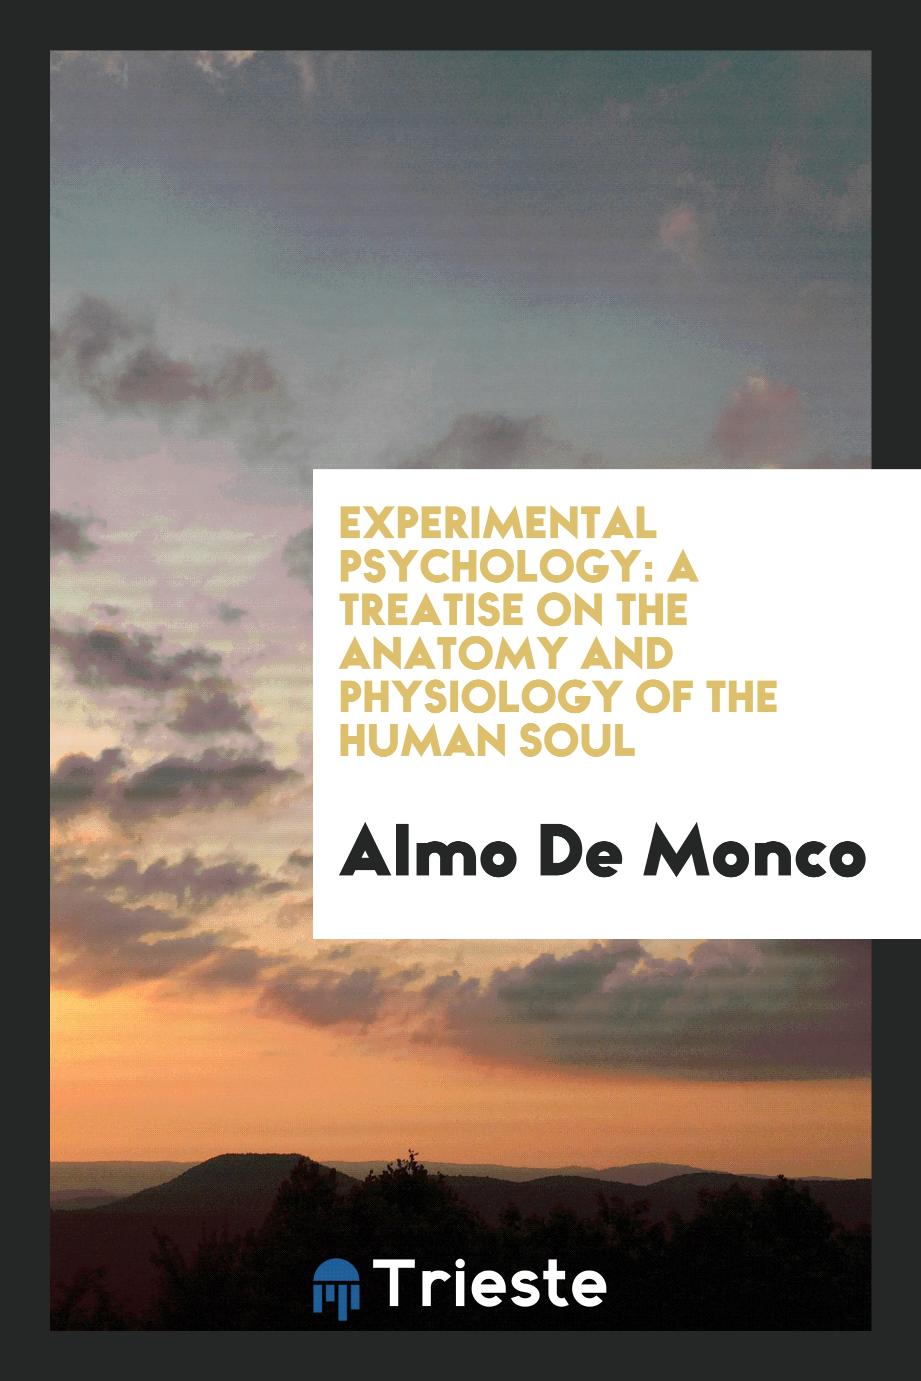 Experimental psychology: a treatise on the anatomy and physiology of the human soul